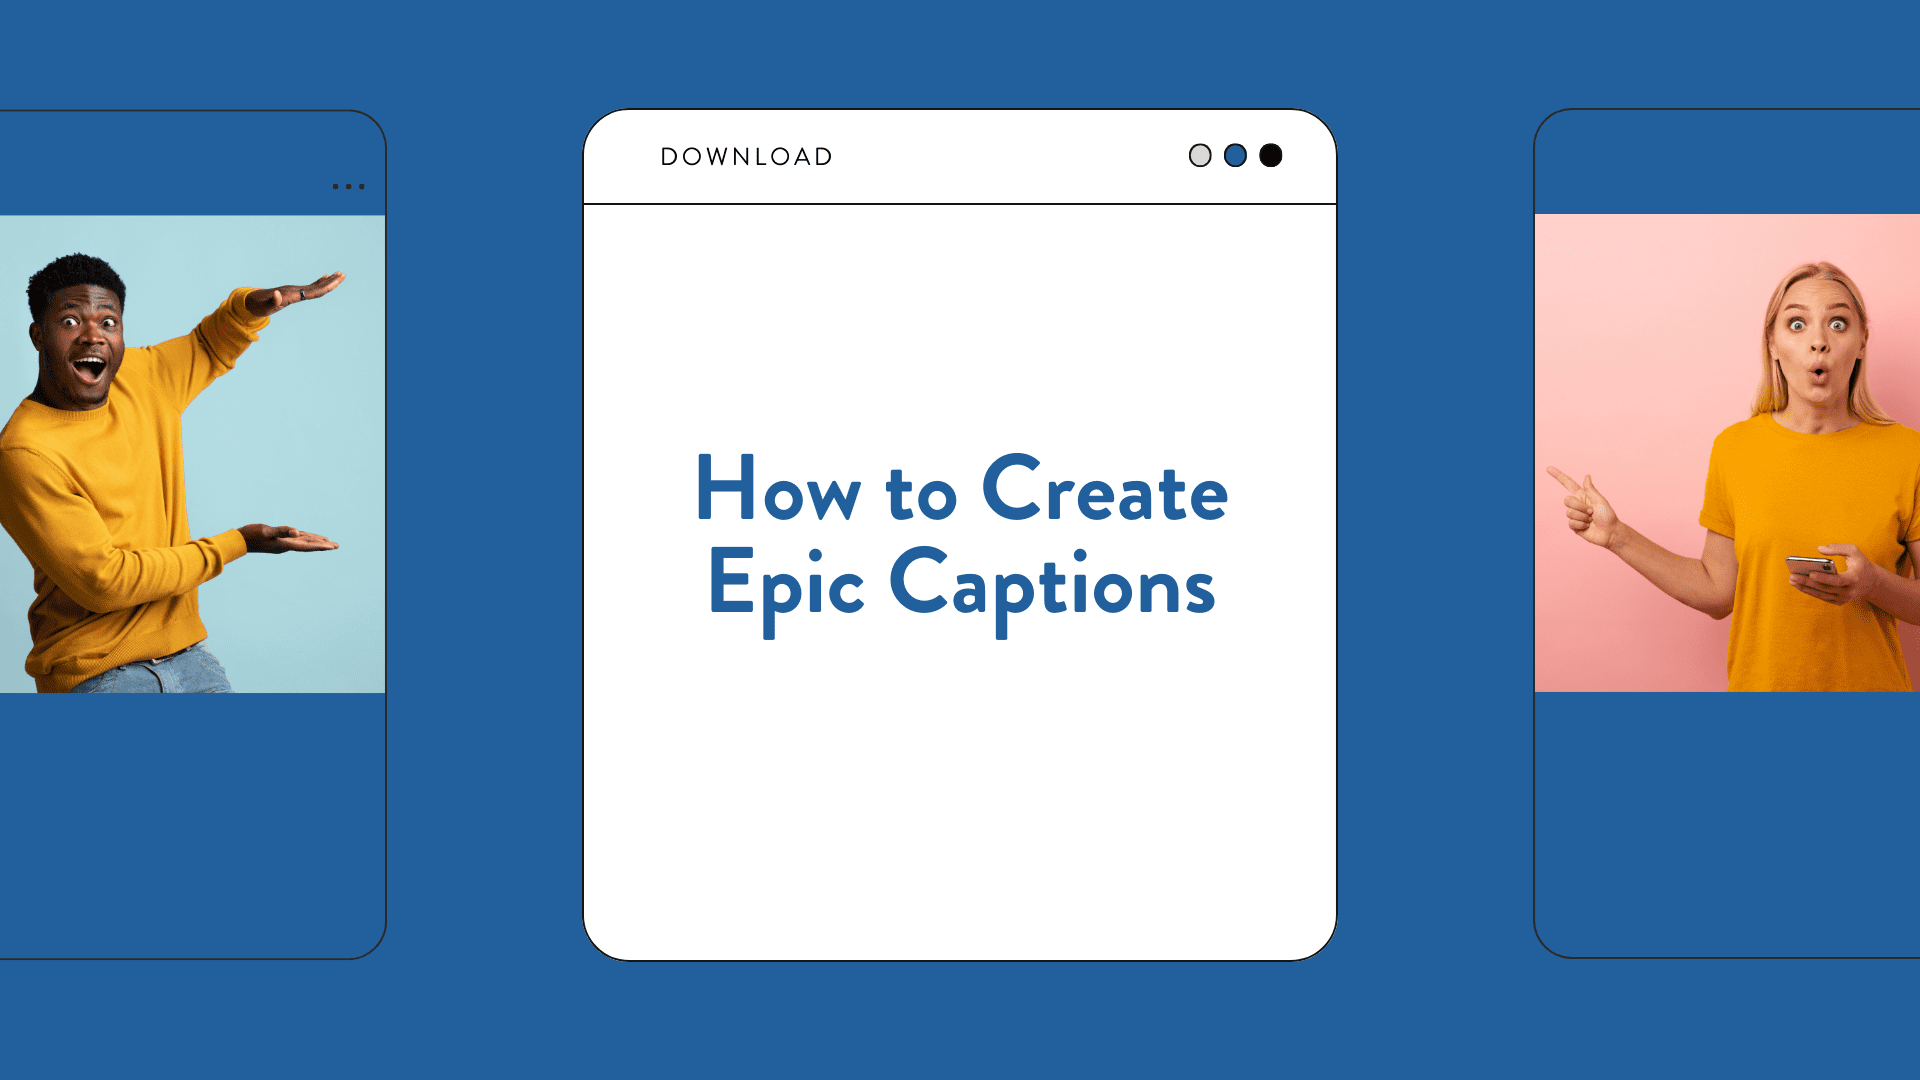 How to Create Epic Social Media Captions